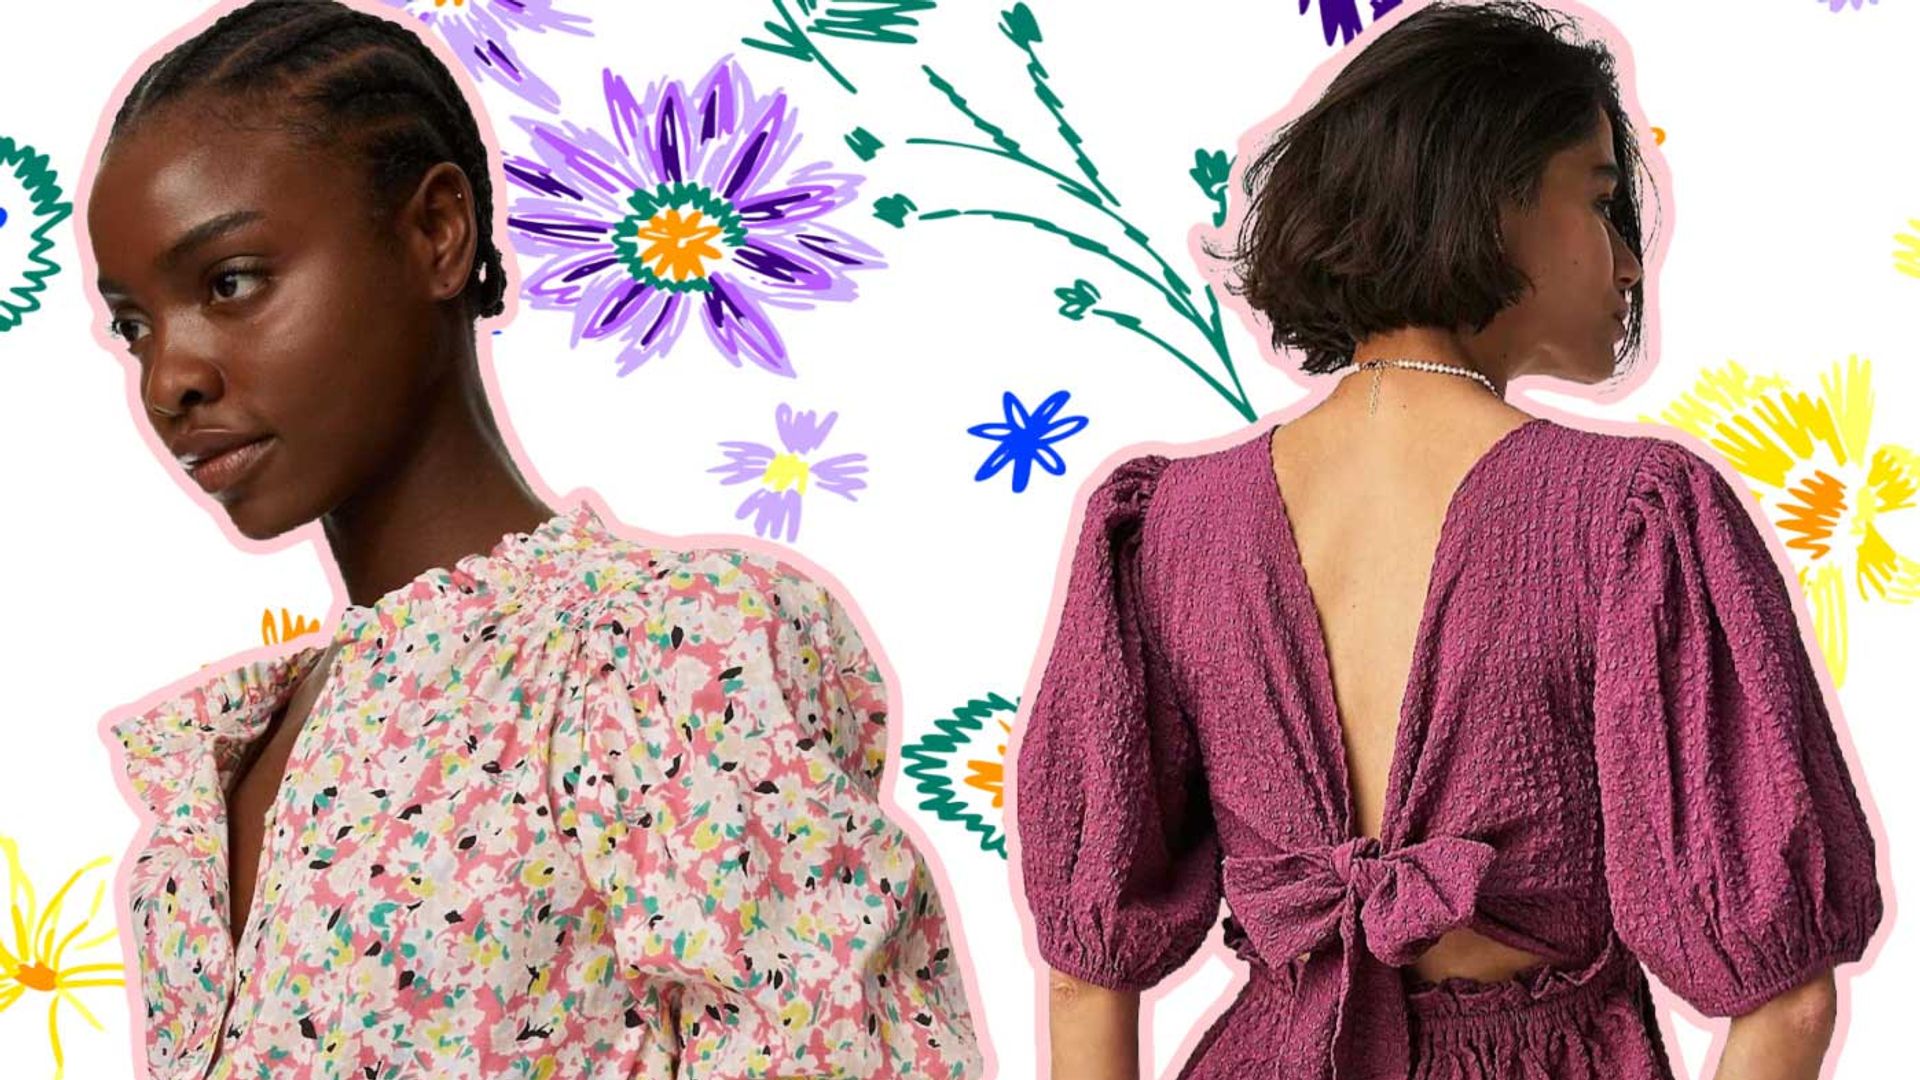 11 pretty tops for women this spring: Florals, pastels, crochet